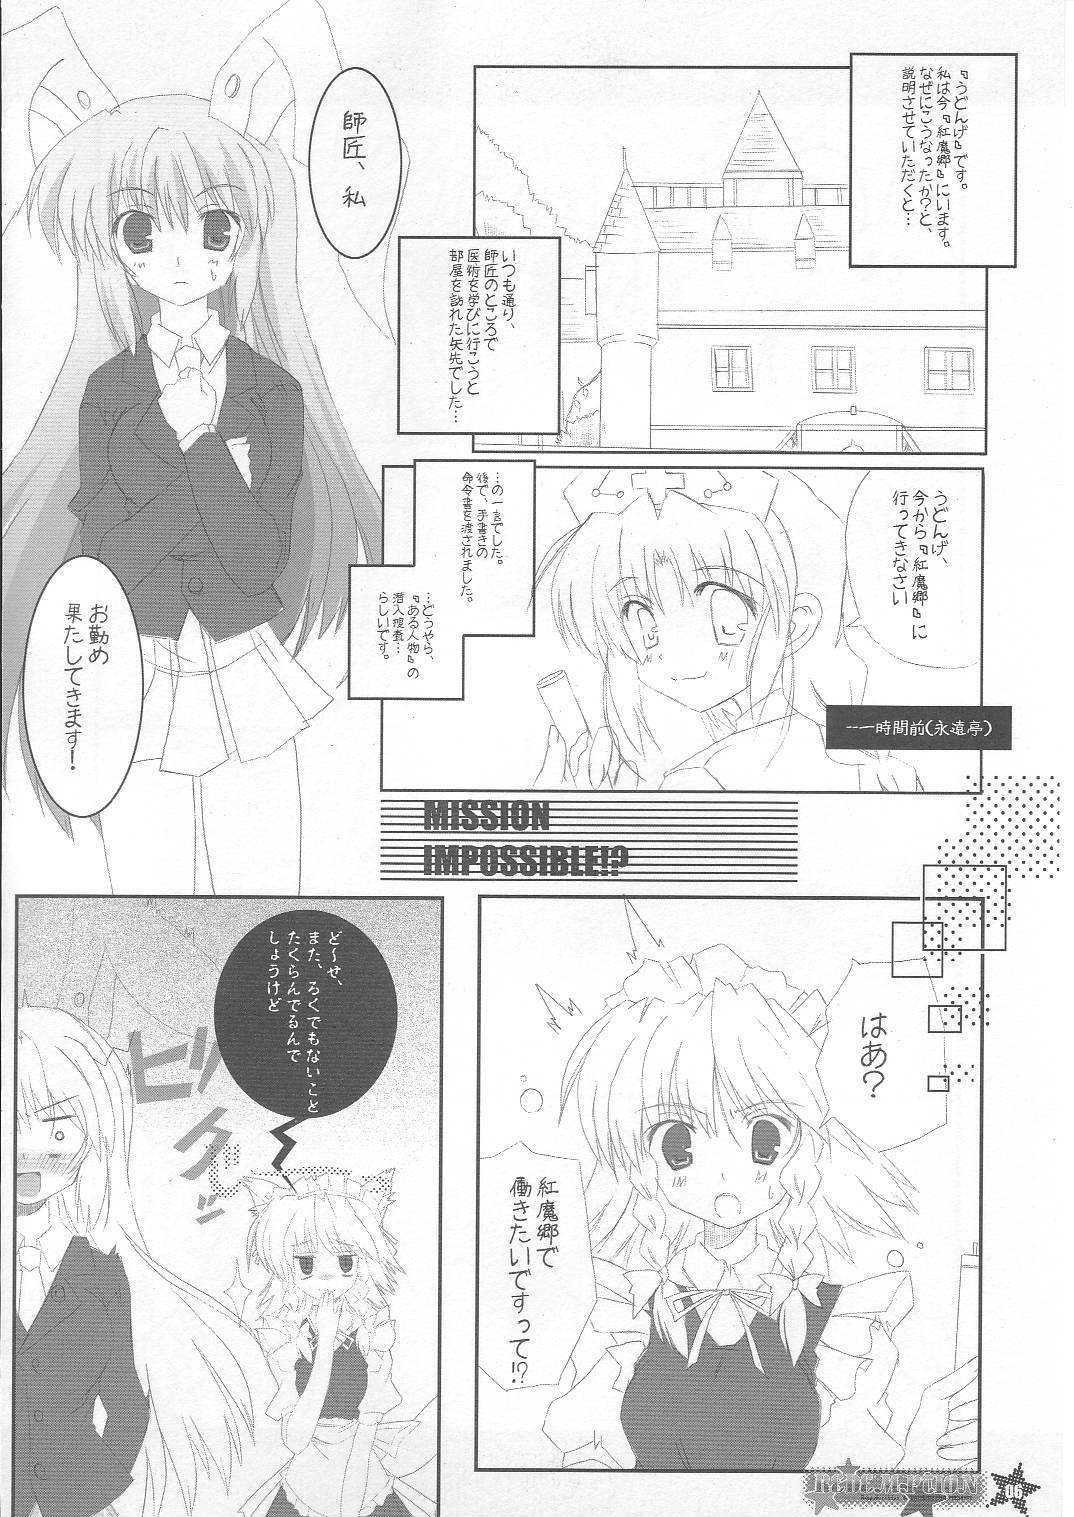 (SC30) [HappyBirthday (Maruchan., Monchy)] REDEMPTION (Touhou Project) page 5 full